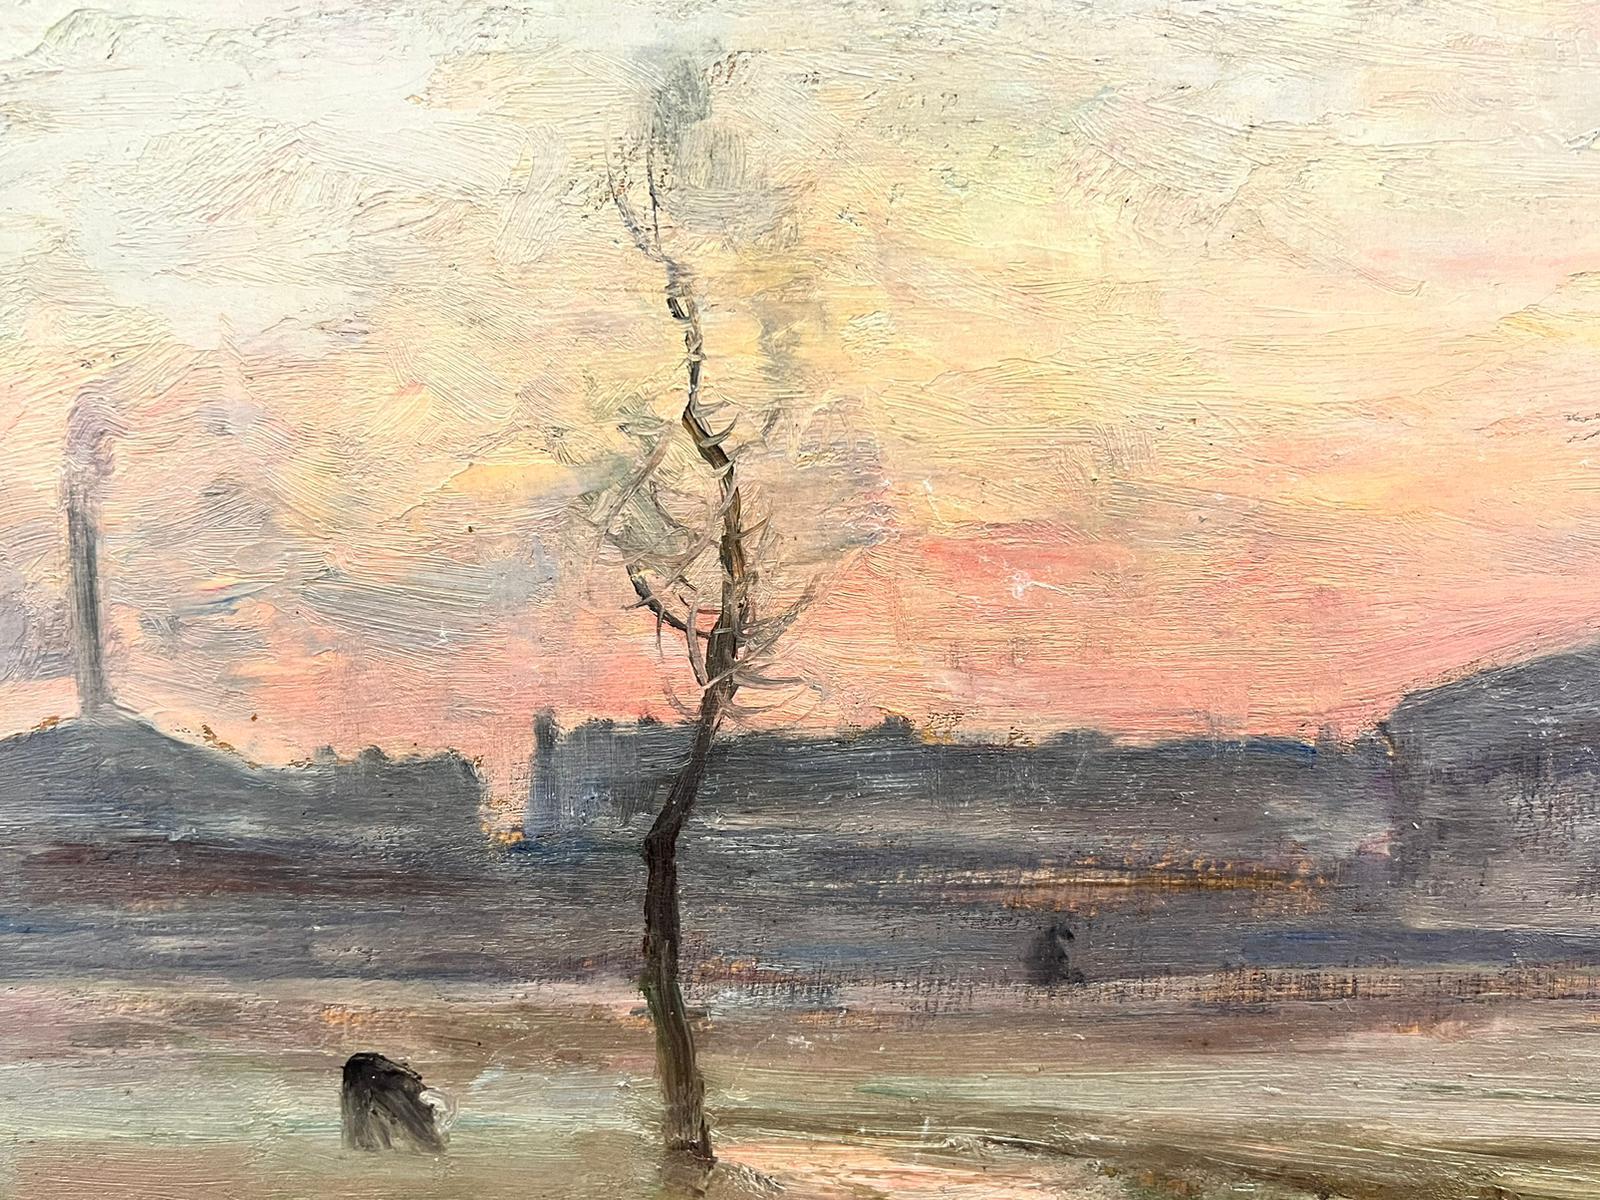 Artist/ School: Paul Sebilleau. (French 1848-1907), signed and dated March 1893

Title: Sunset

Medium: oil on panel 

Size: 10.5 x 14 inches

Provenance: private collection, France

Condition: The painting is in overall very good and sound